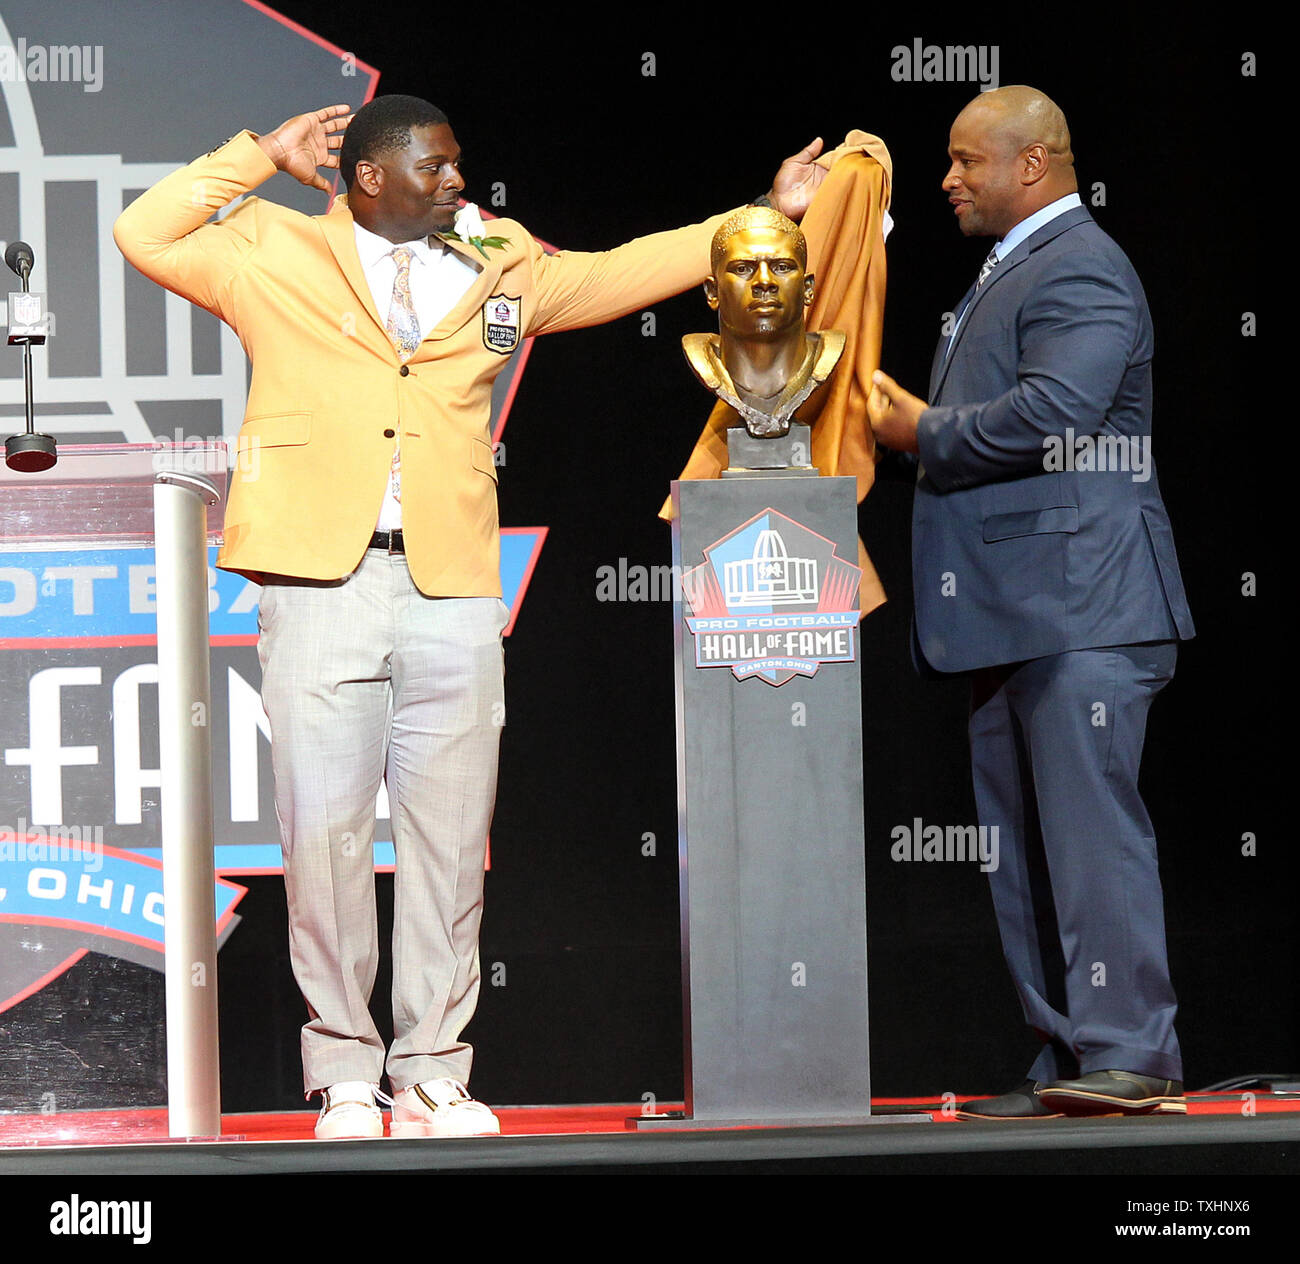 LaDainian Tomlinson, with the help of Lorenzo Neal, uncovers his bust during his enshrinement into the Pro Football Hall of Fame at Tom Benson Hall of Fame Stadium in Canton, Ohio on August 5, 2017.     Photo by Aaron Josefczyk/UPI Stock Photo